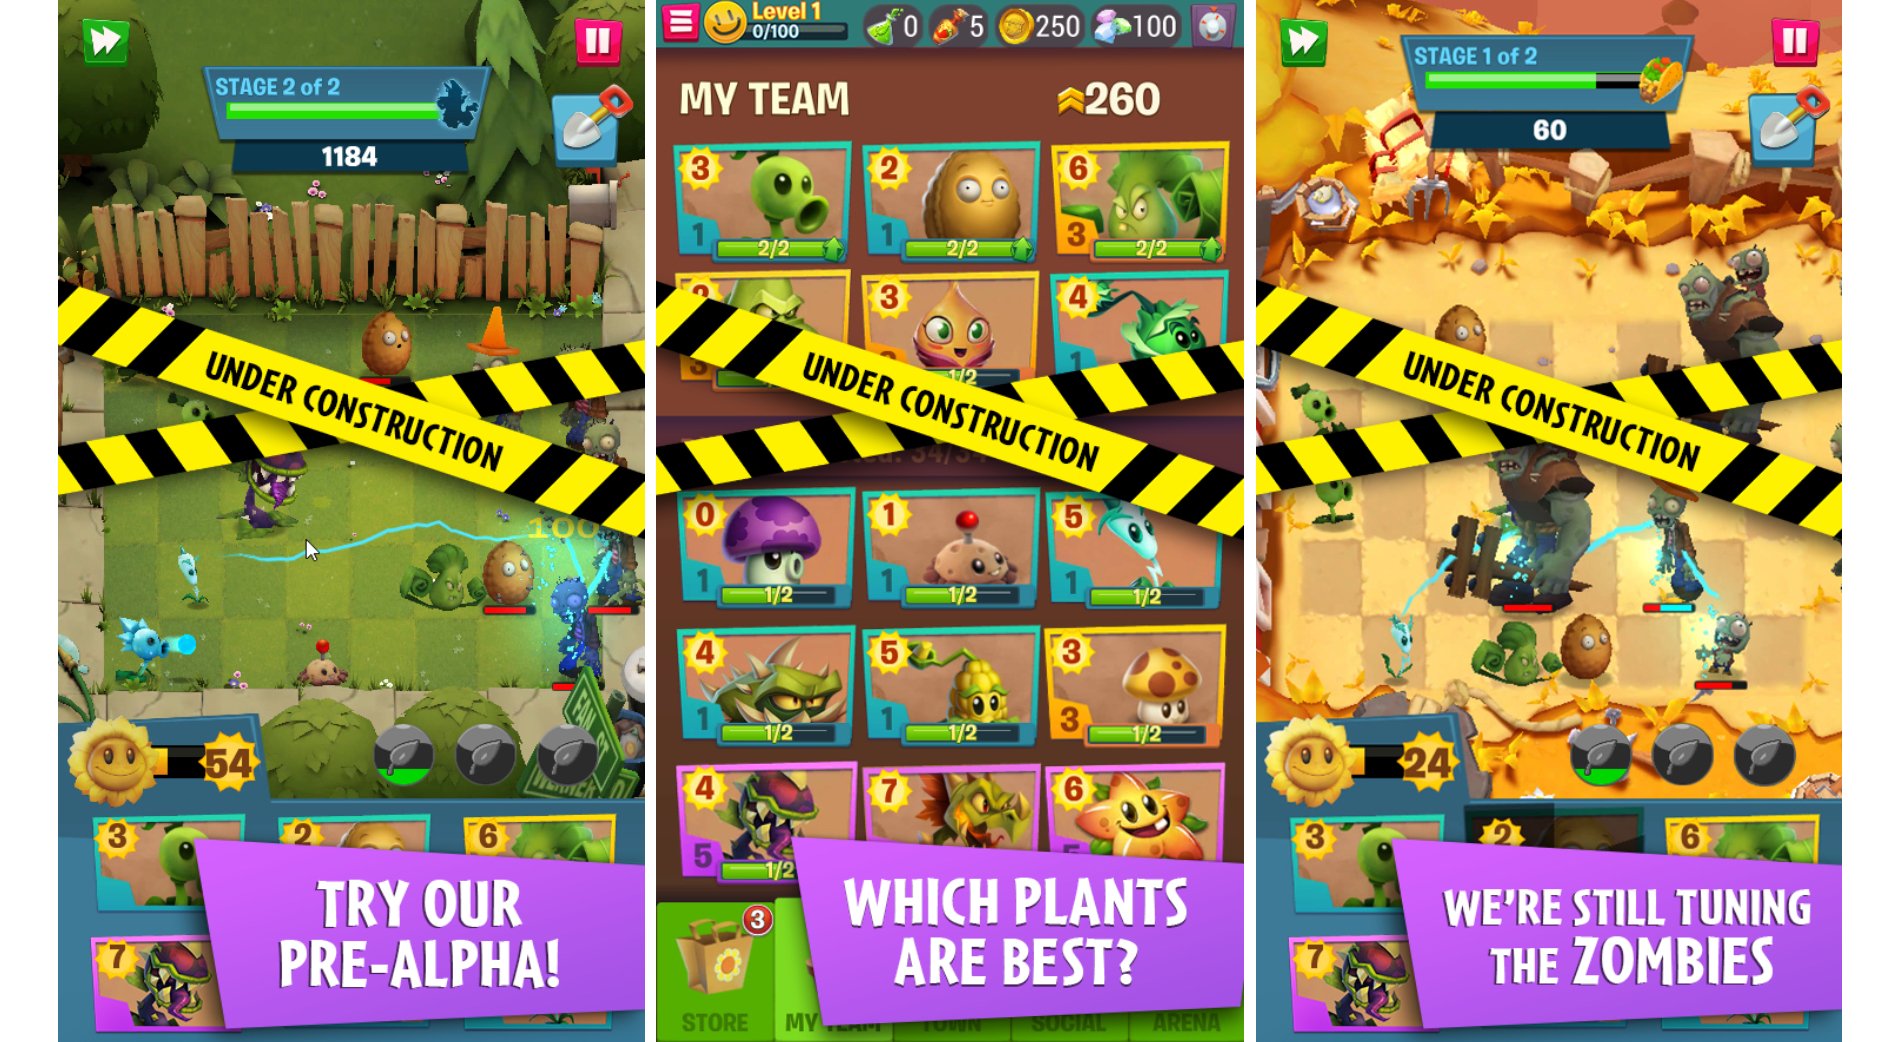 Plants Vs Zombies 3 From Popcap Games And Ea Is Real And Currently Available In Closed Alpha For Android Toucharcade